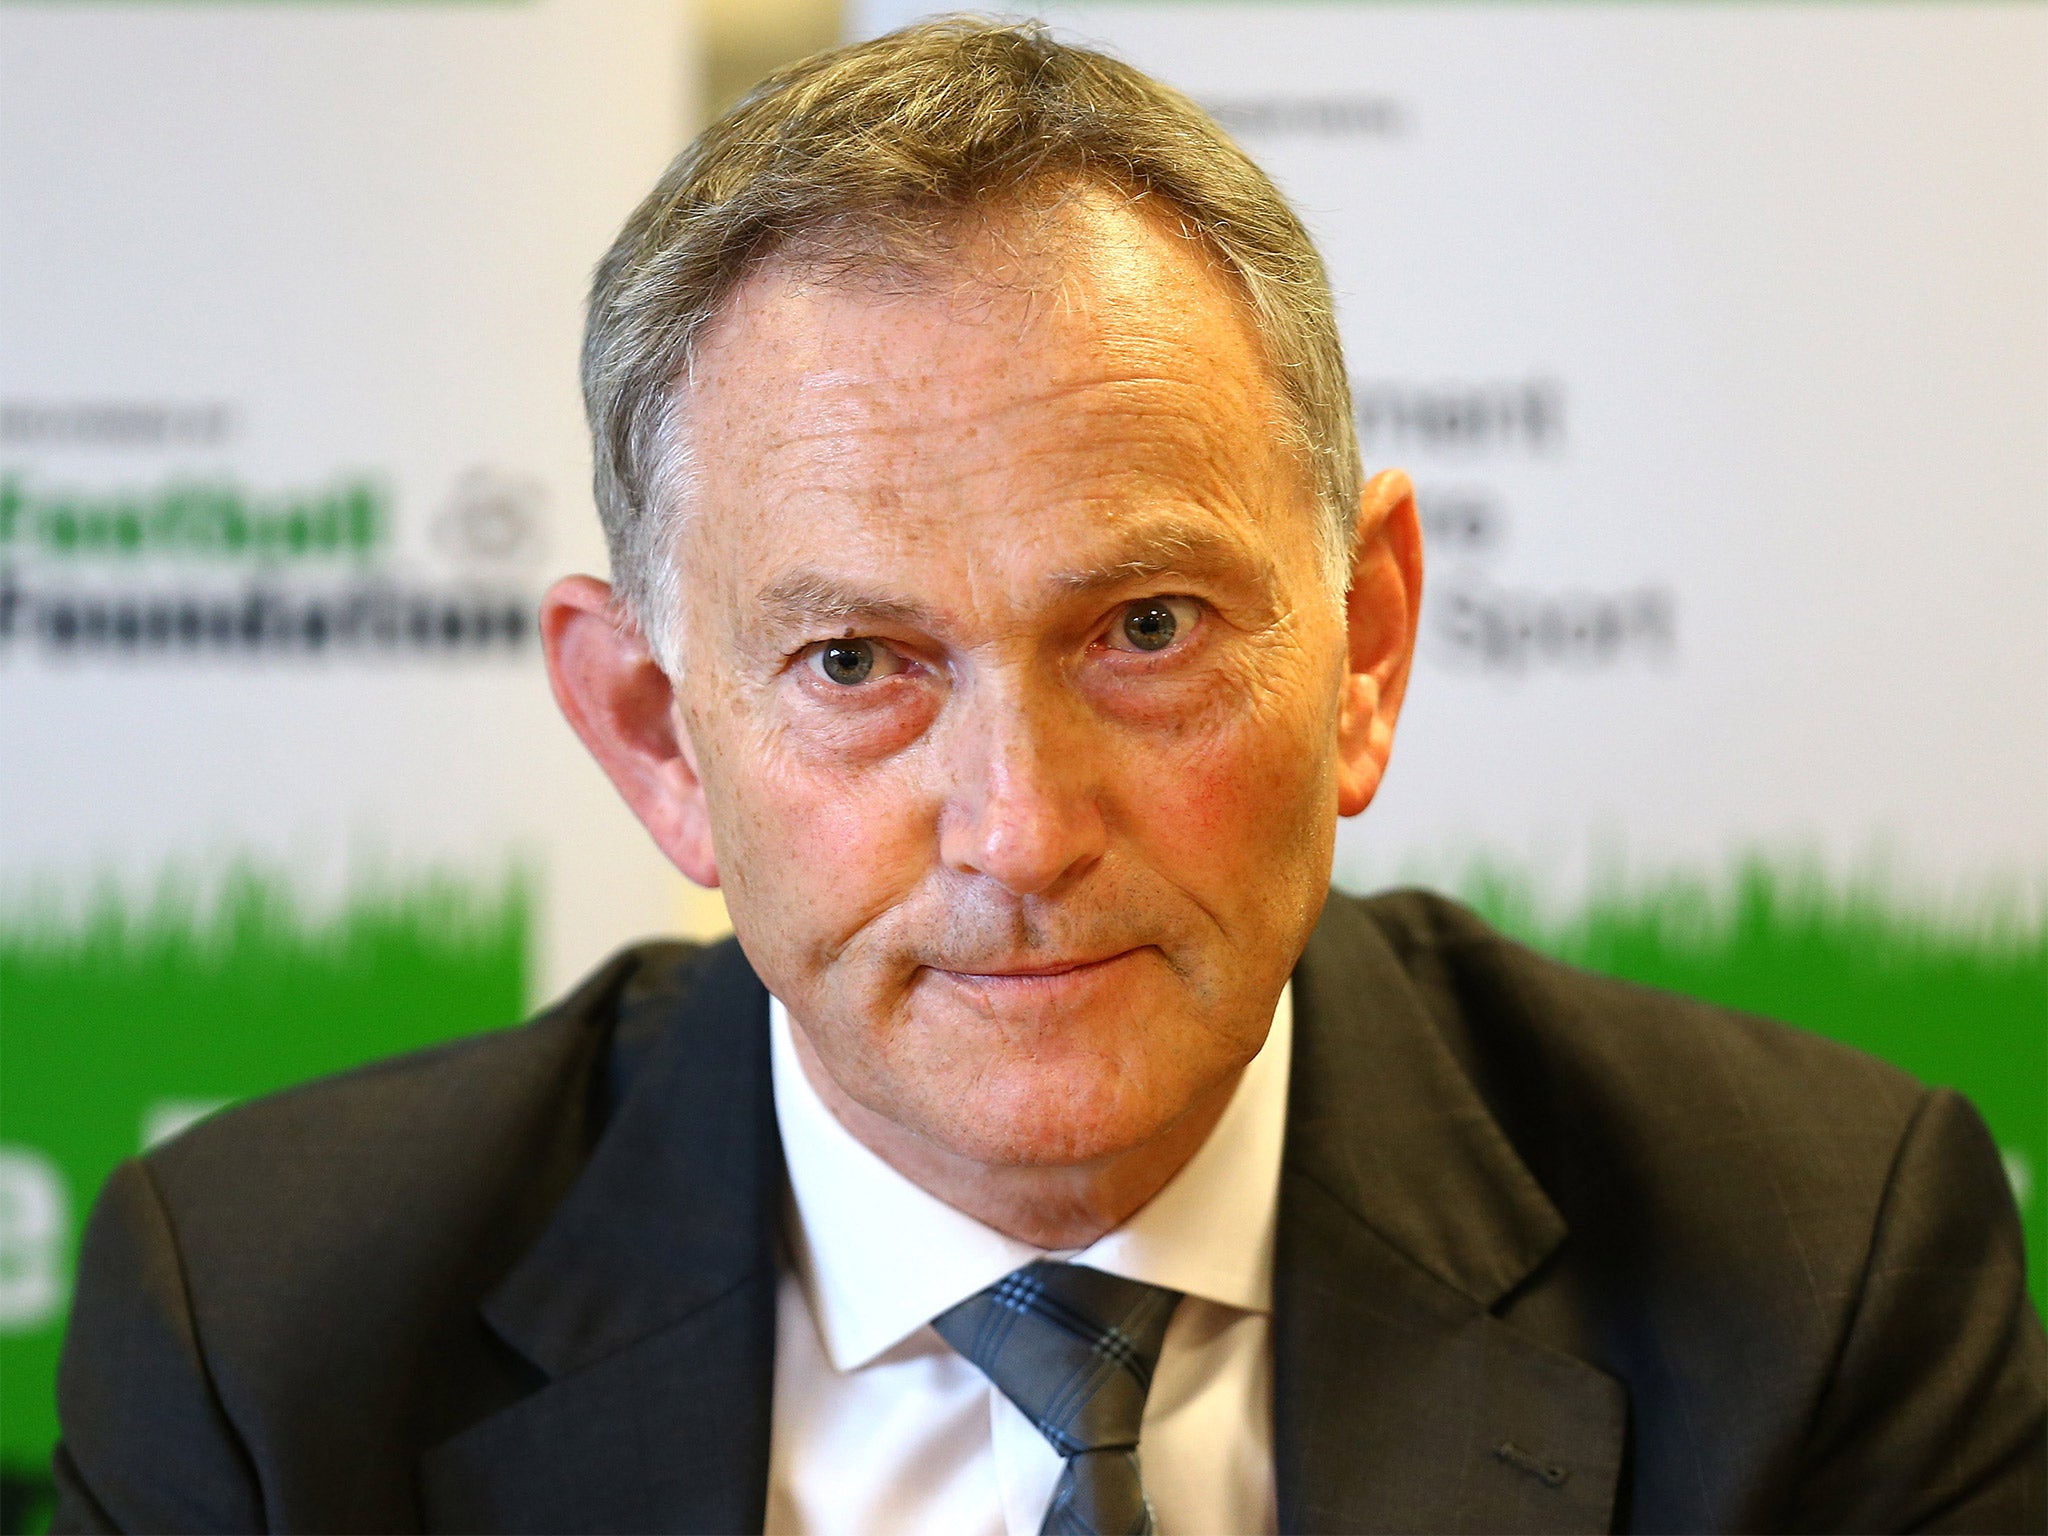 Richard Scudamore vies with Bernie Ecclestone as Britain’s most powerful sports administrator